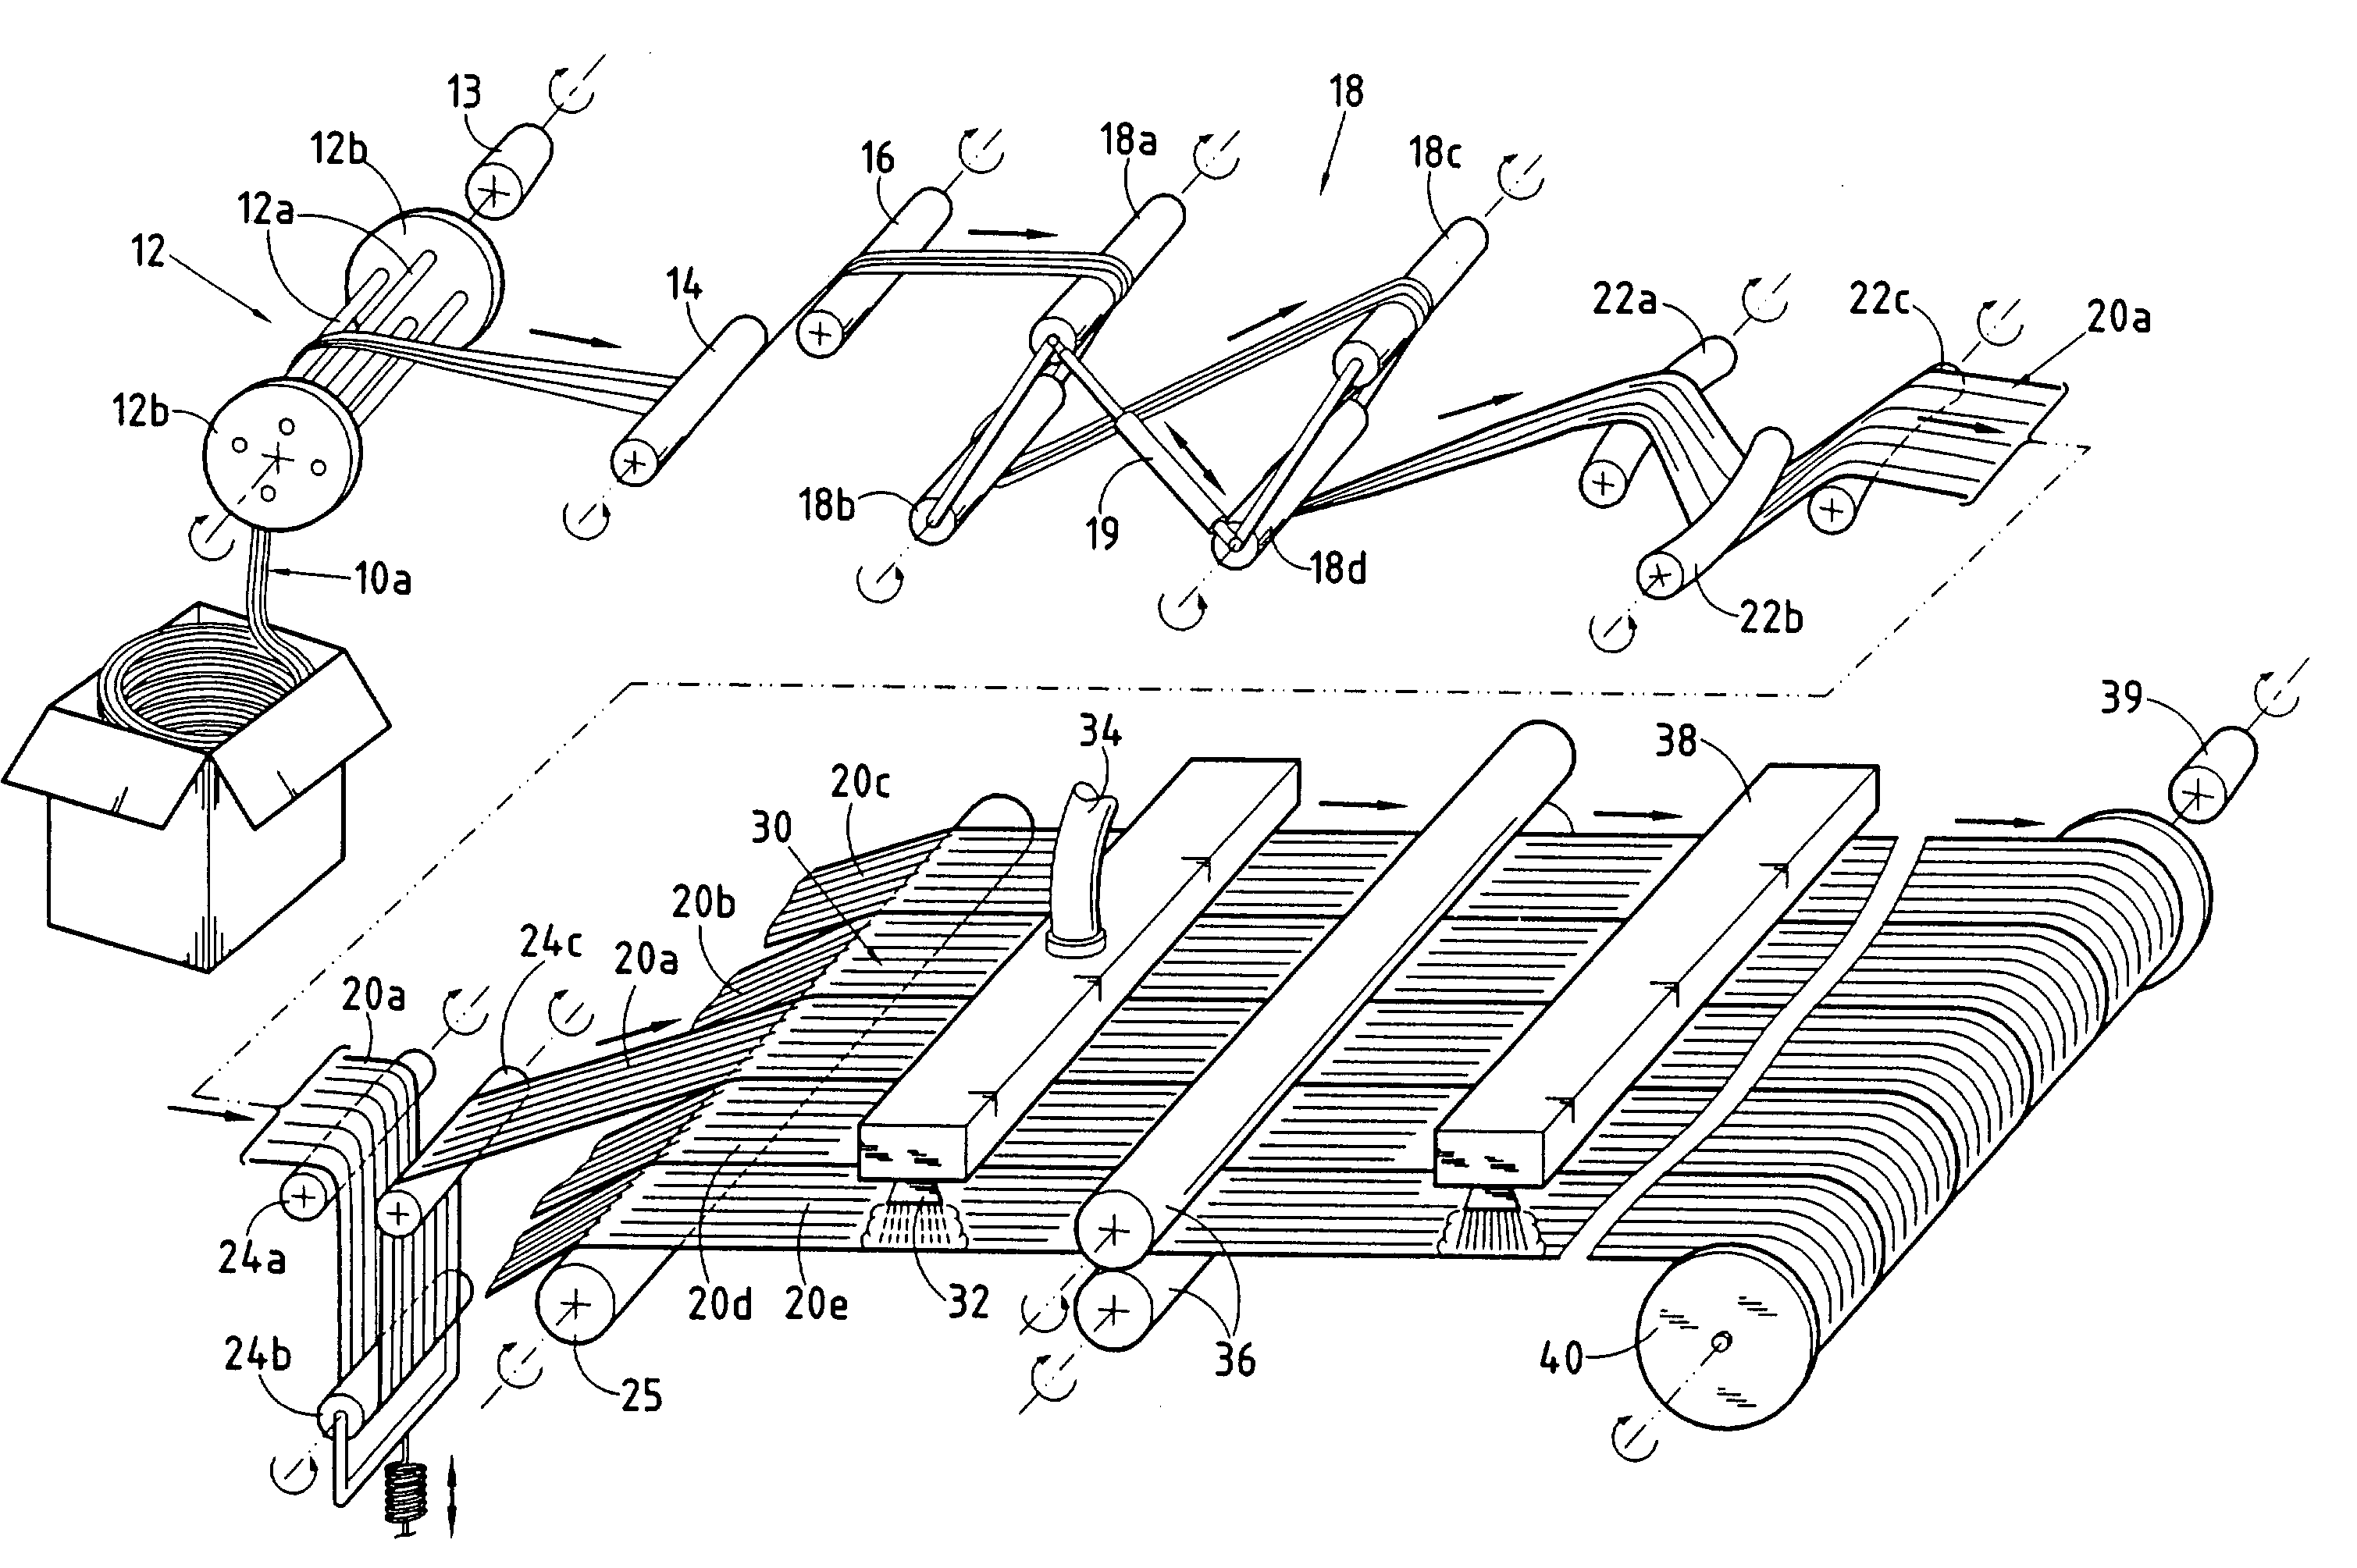 Method and machine for producing multiaxial fibrous webs